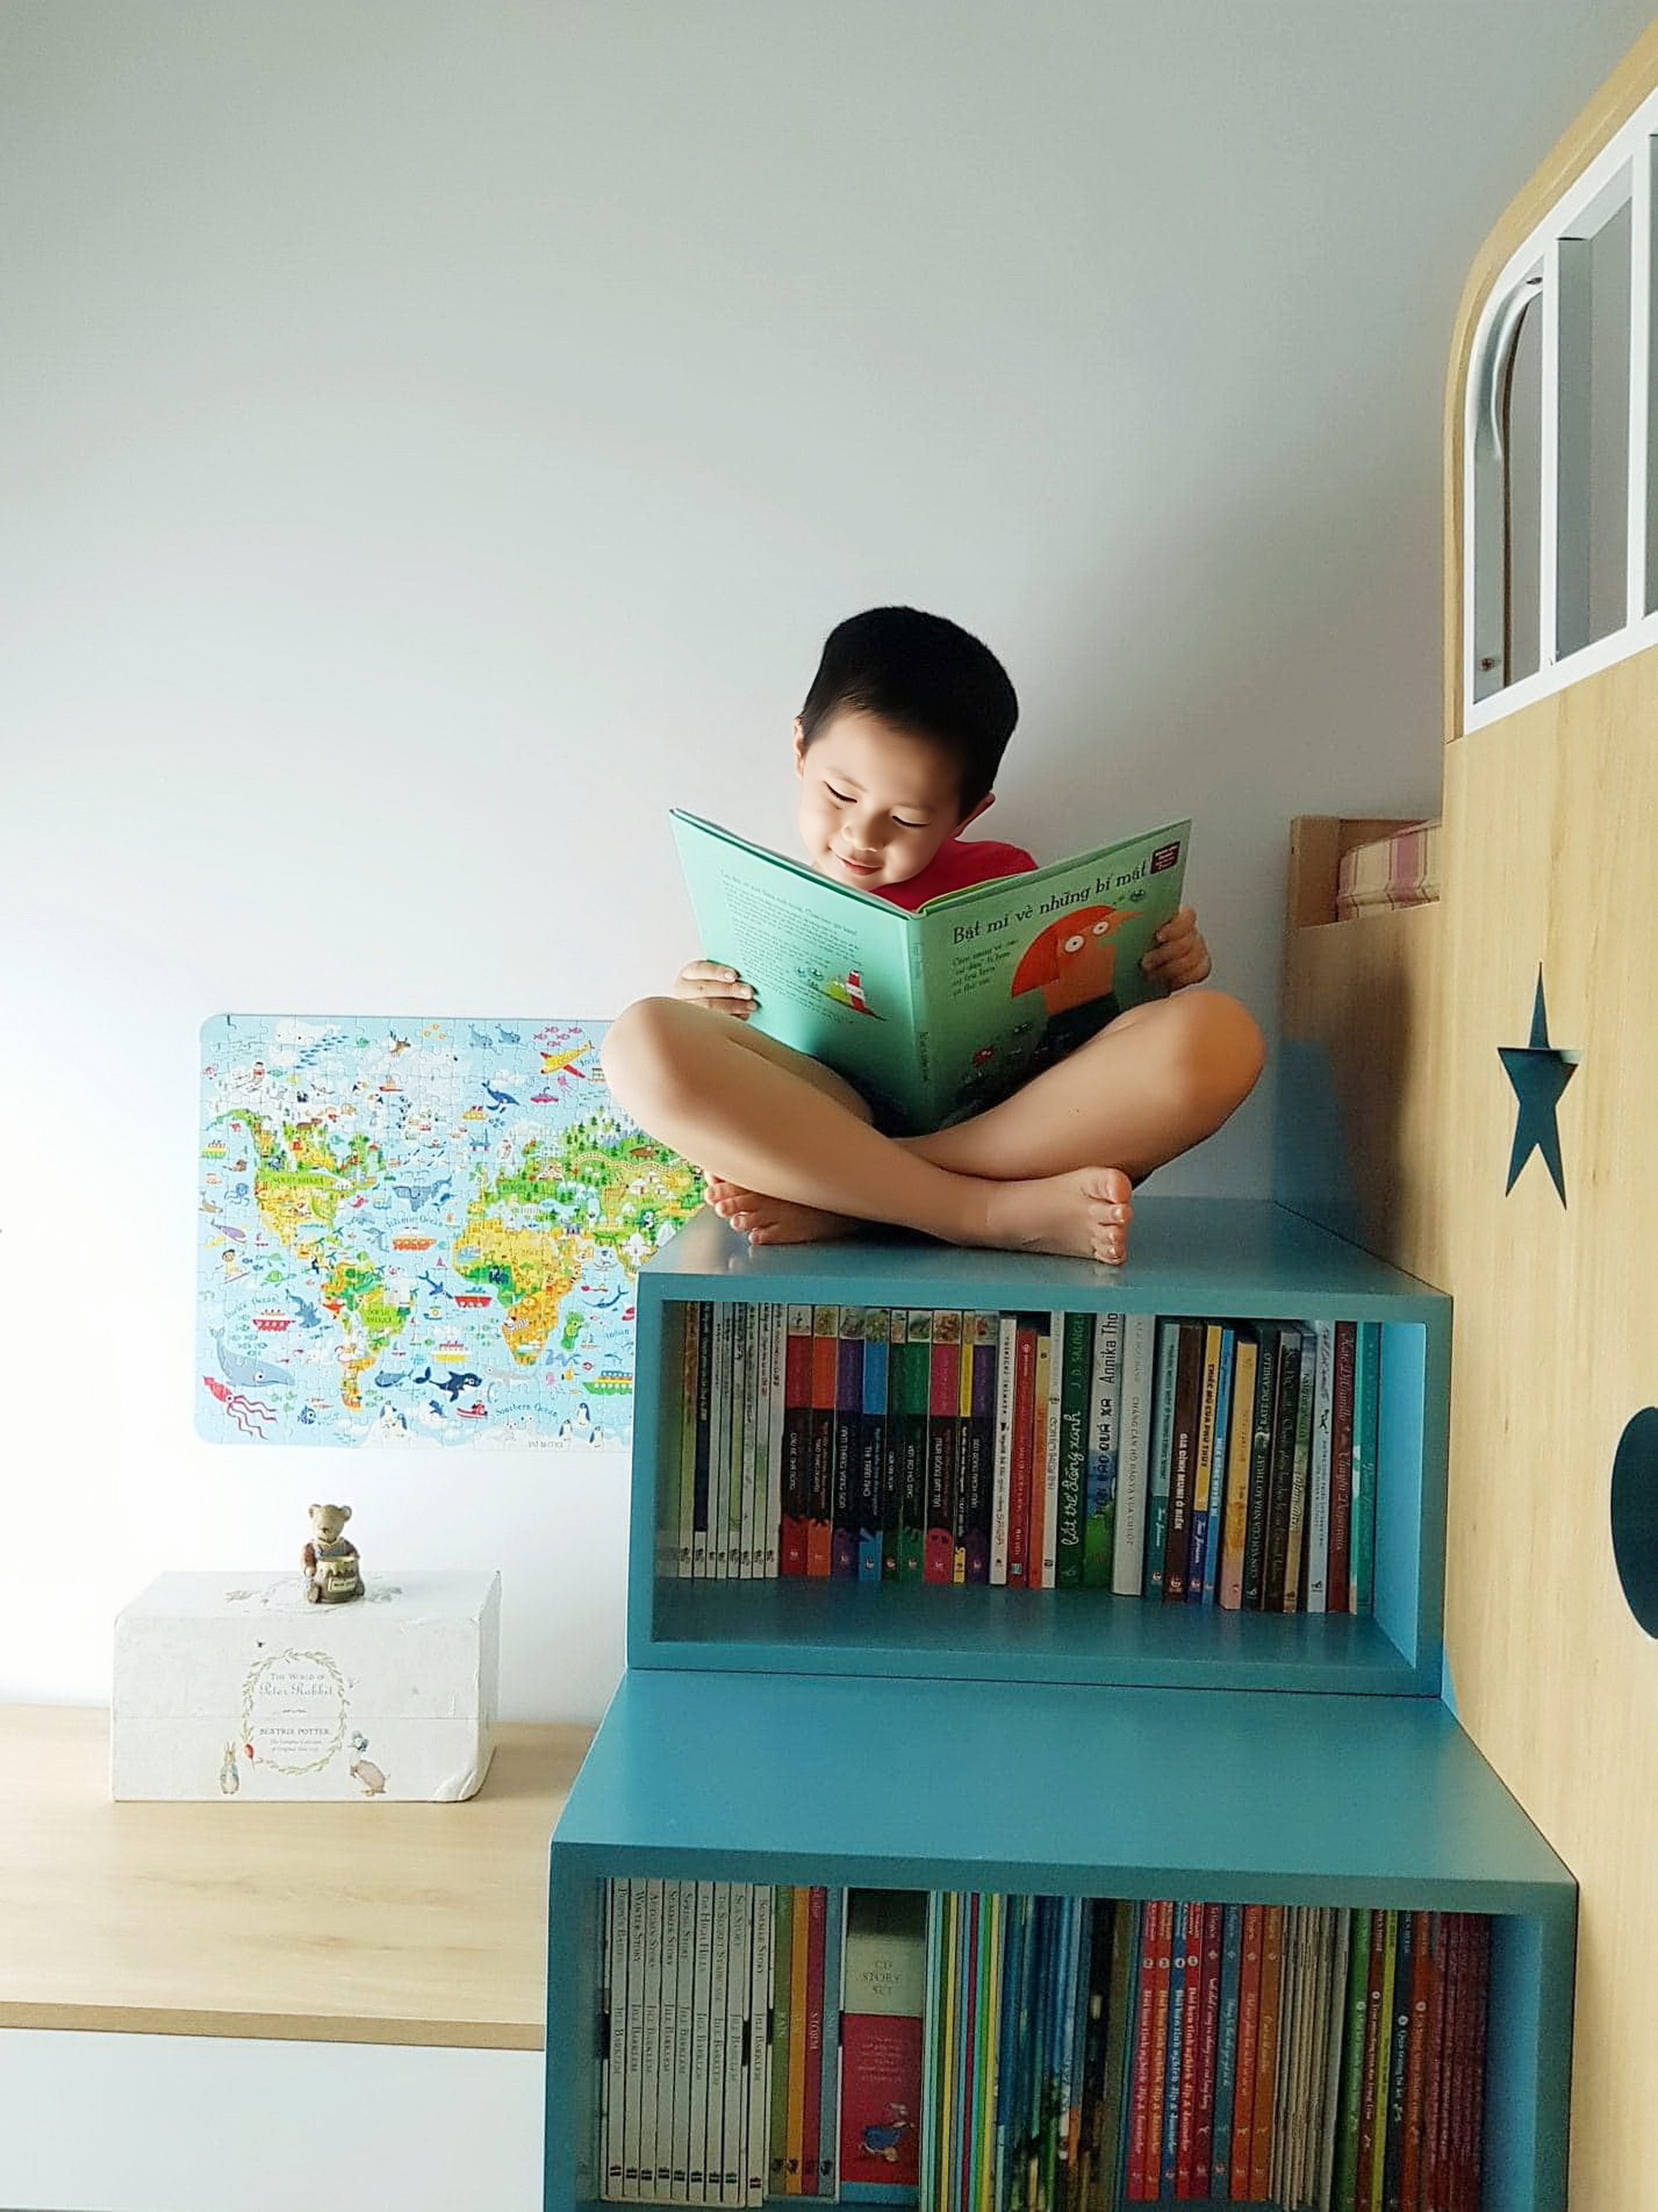 Pham Thi Hoai Anh’s son enjoys a book at a reading corner in their house in Hanoi. Photo: Supplied